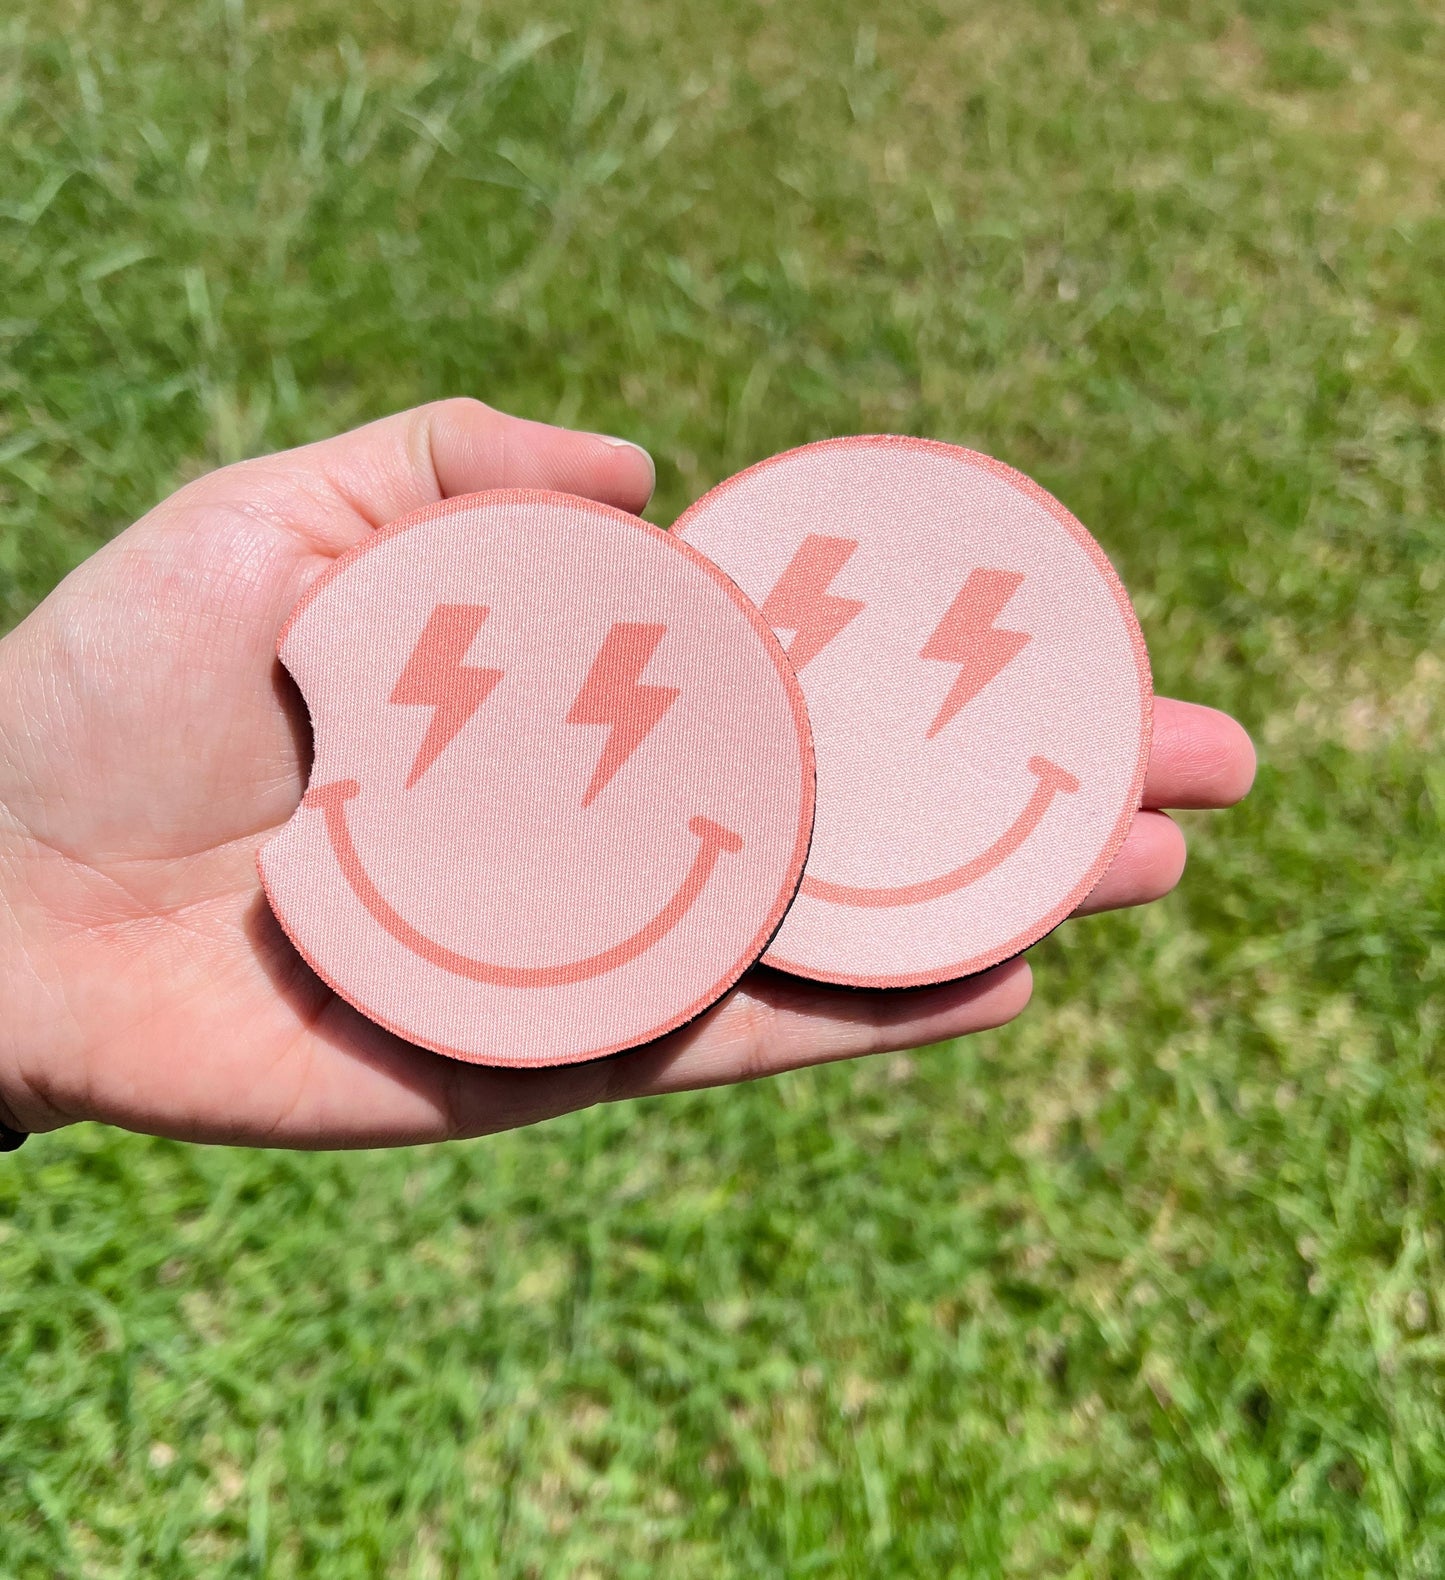 Smile Face Car Coasters Set of 2, Peach Color Lightning Bolt Eyes Car Coasters, Car Gift, Birthday Gift for Women, Cup Holder Coasters